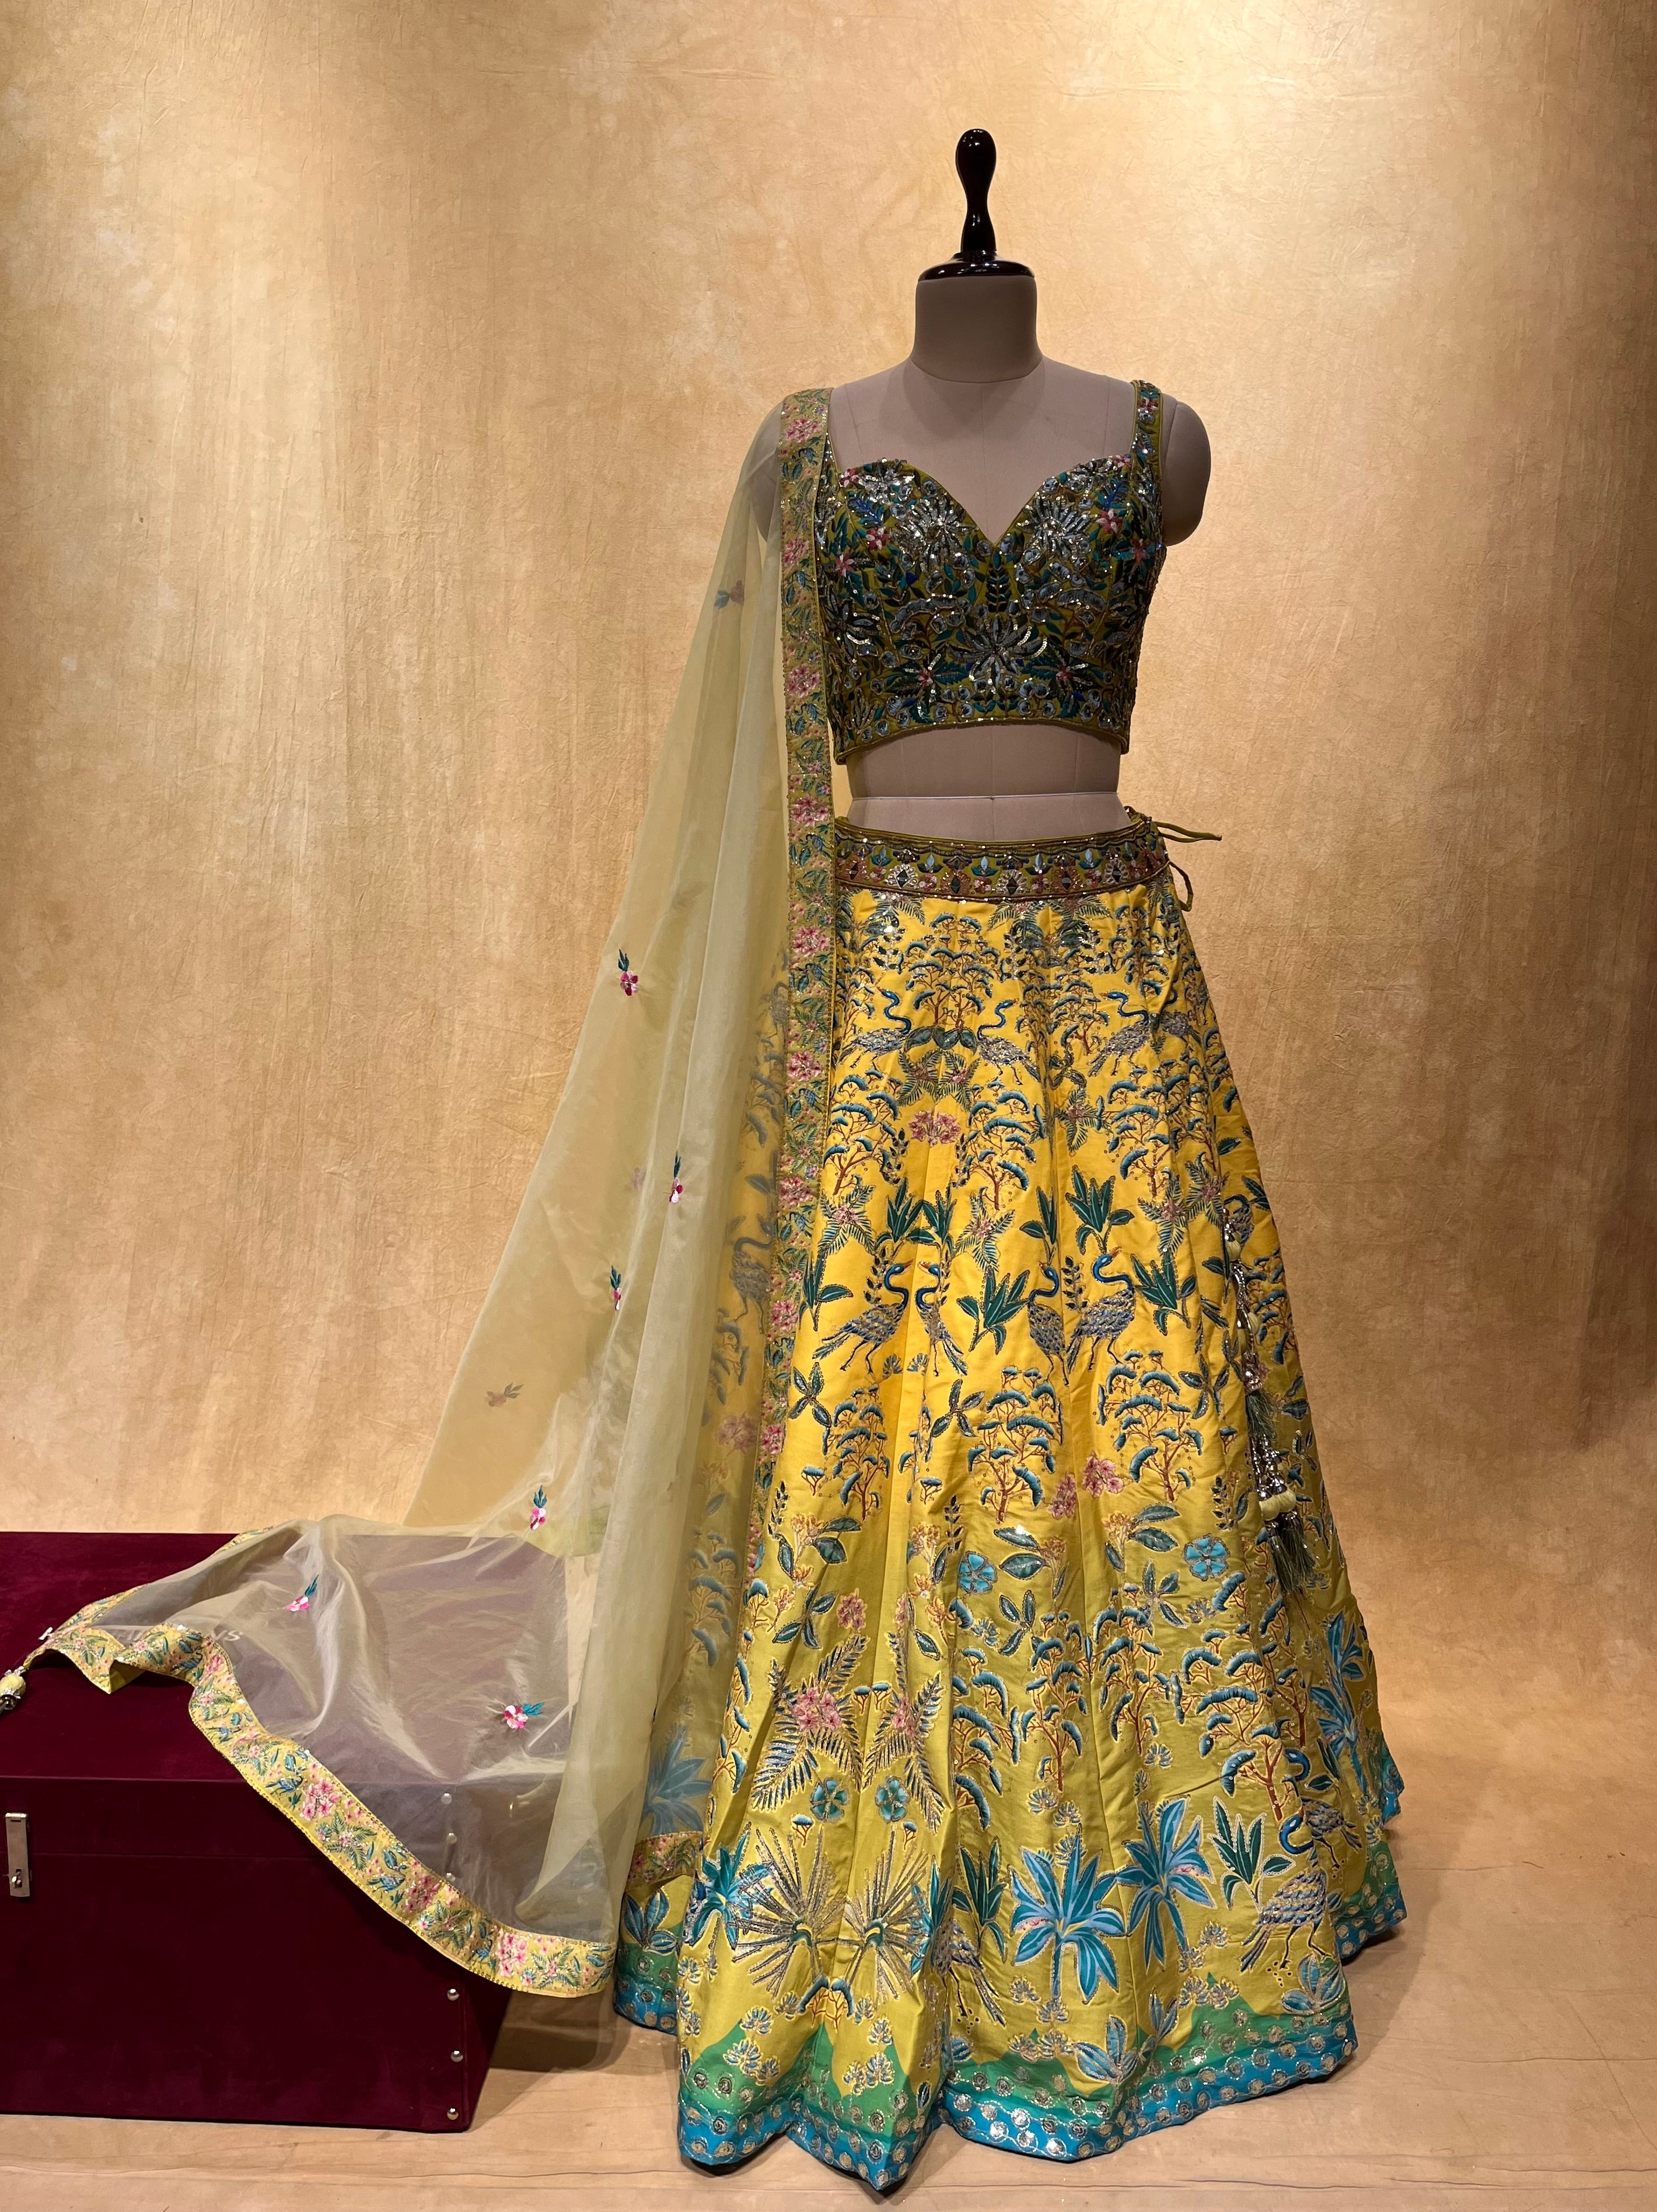 19 Dazzling Sangeet Lehenga Designs For A Starry Bridal Look | Stylish  dress designs, Indian bride outfits, Lehenga designs